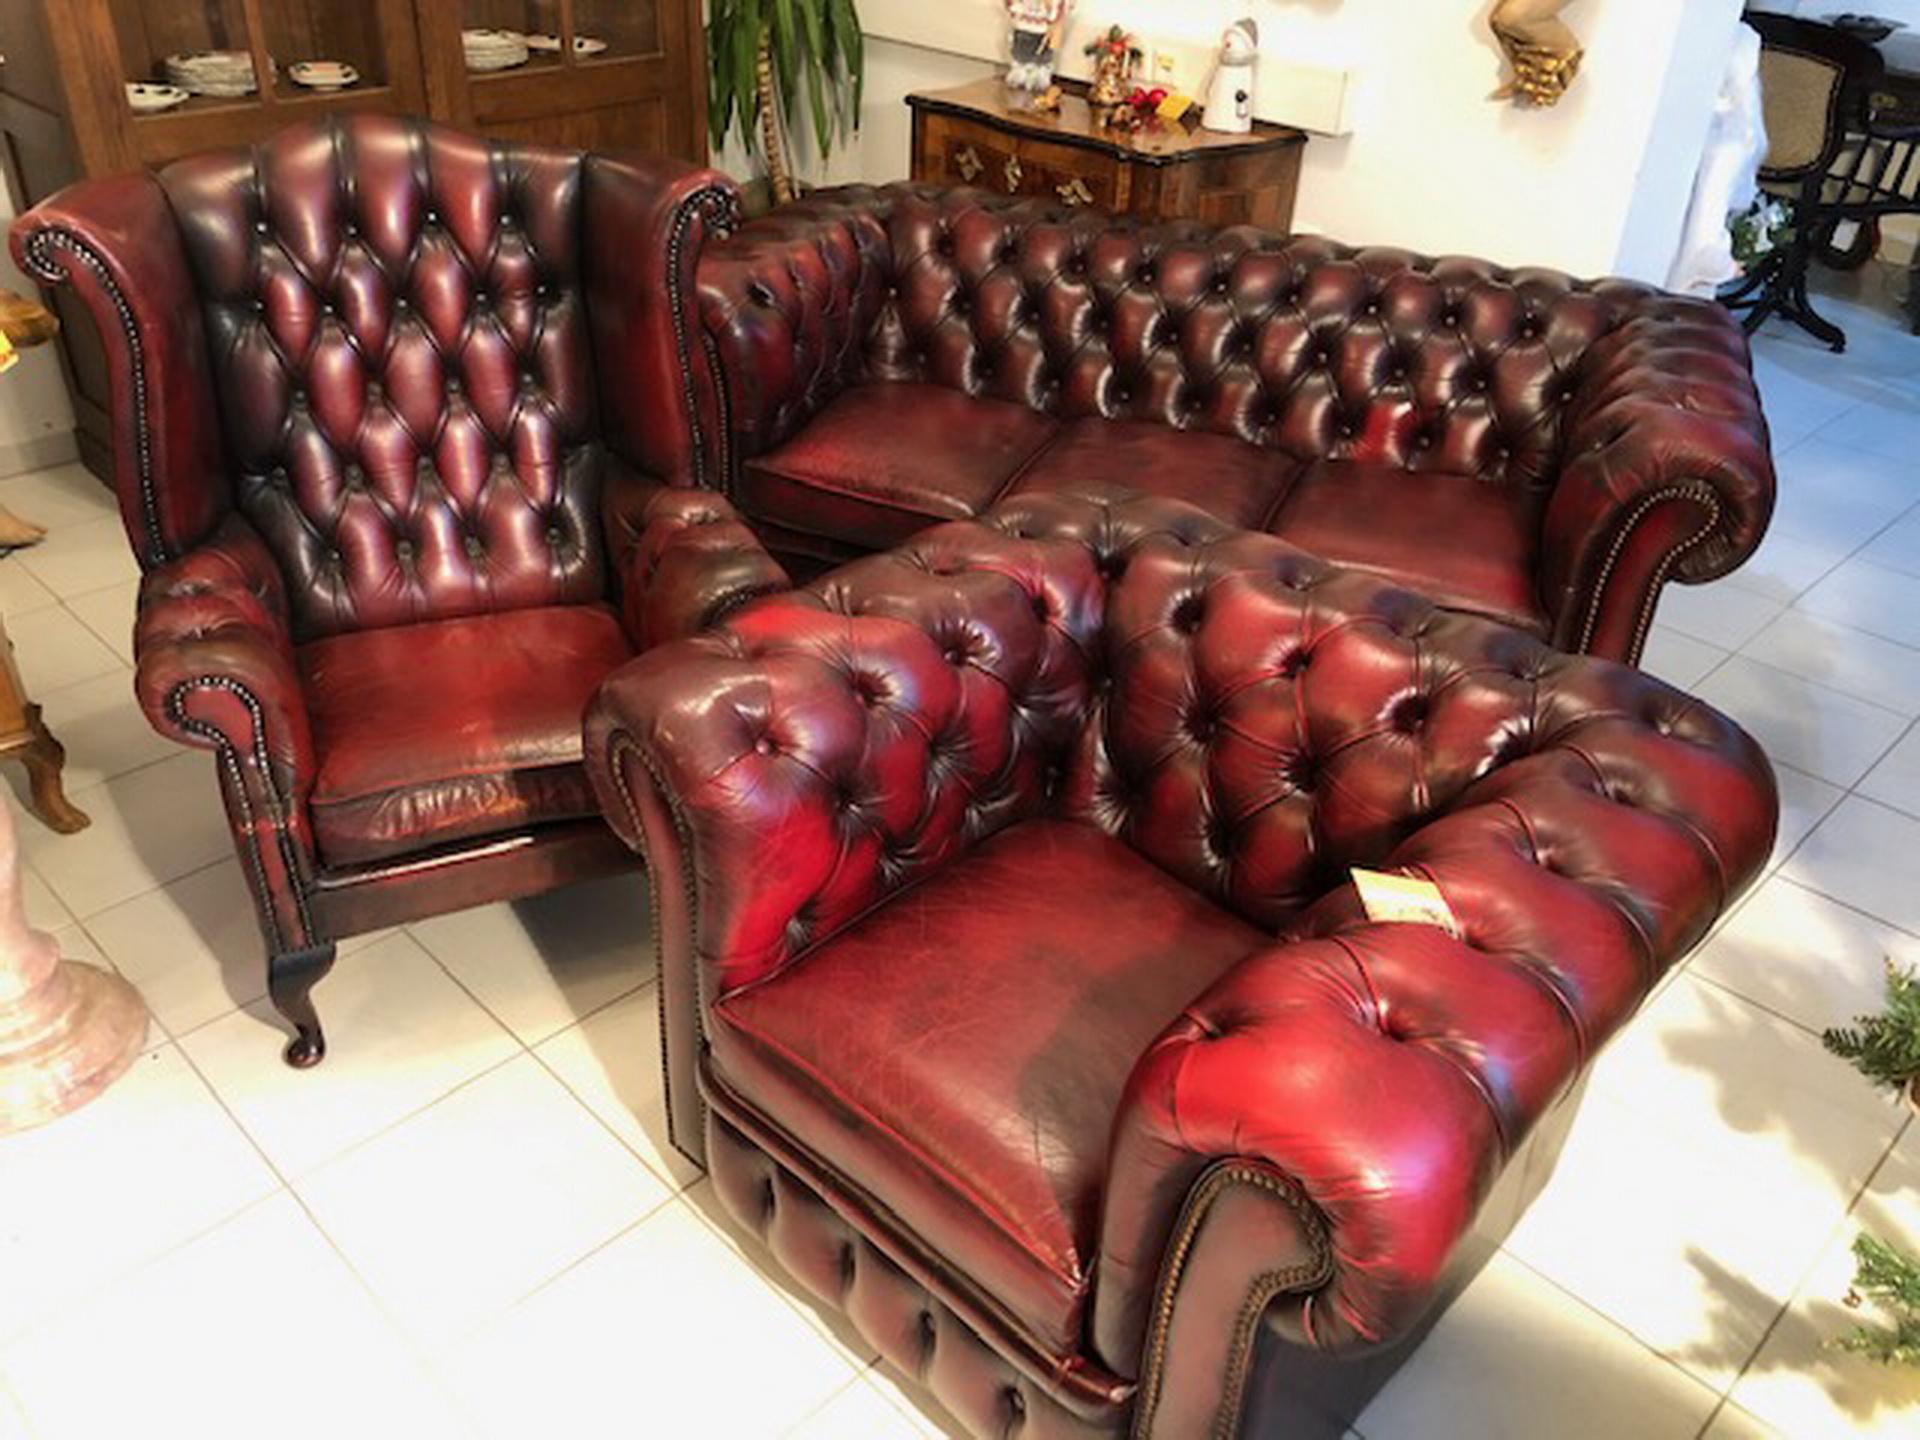 Exclusives comfortable Chesterfield three part living room set.
The set consists of one three-seat sofa, one club armchair and one wing chair.
Features a Classic Chesterfield club design and an oxblood antique red color.
The living room set is